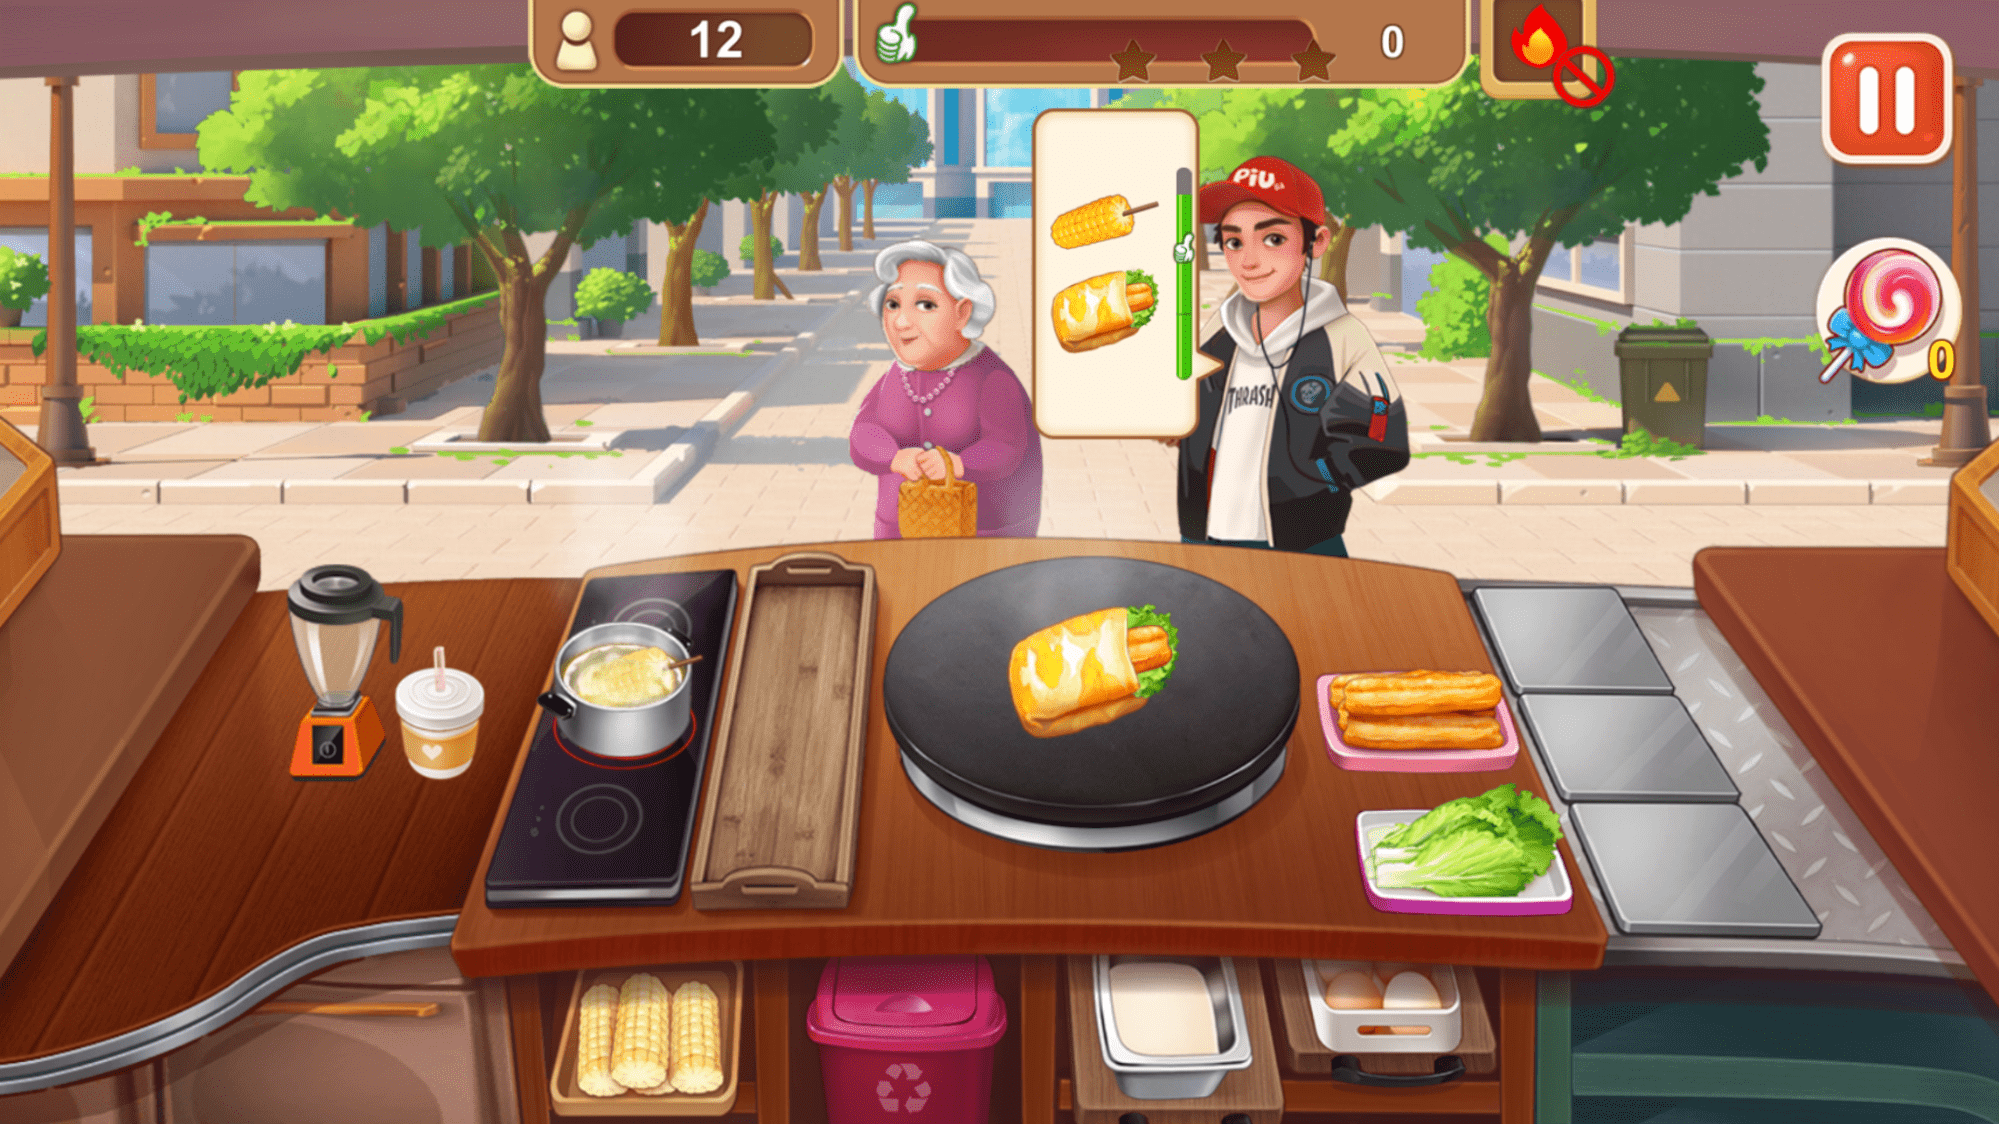 Free Cooking Games - Breakfast Story